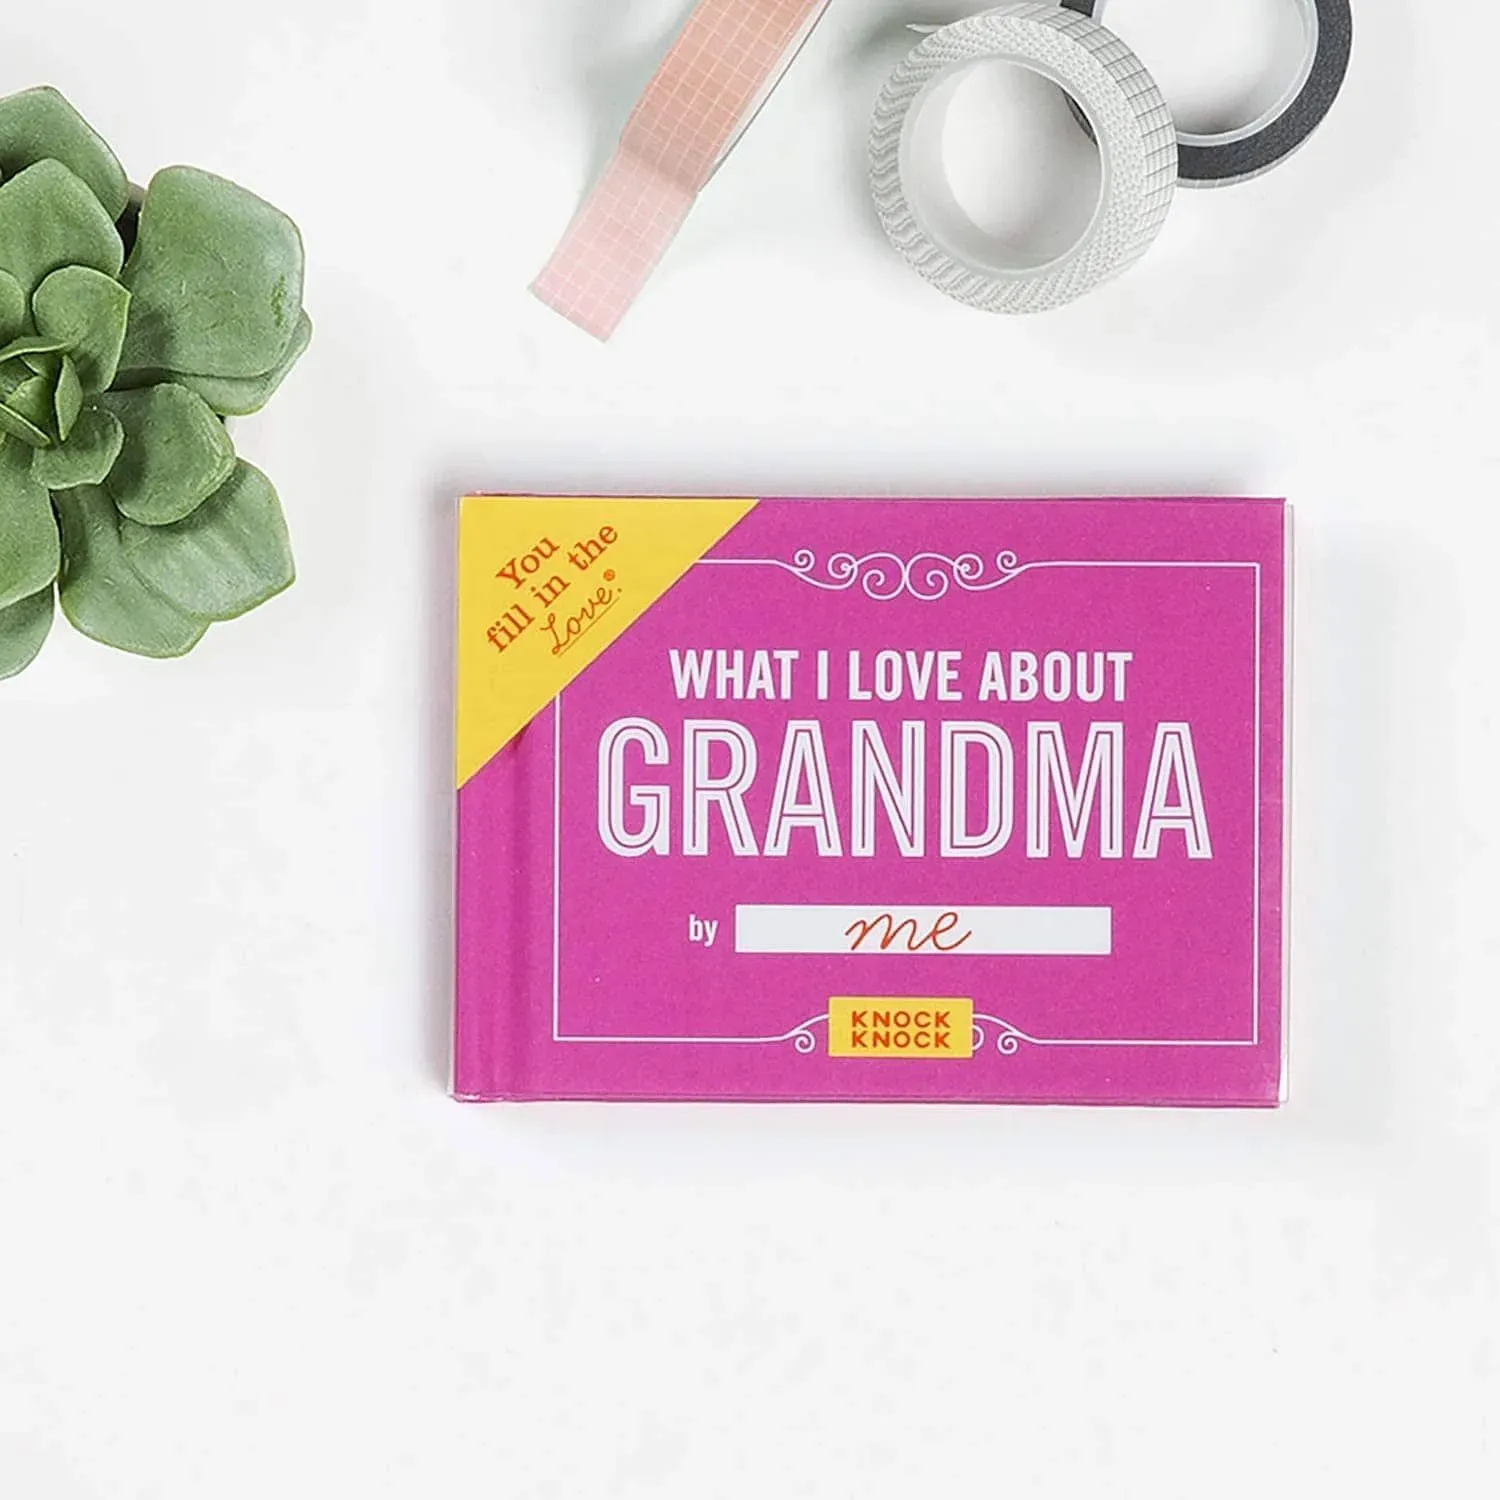  Knock Knock 'What I Love About Grandma' Journal